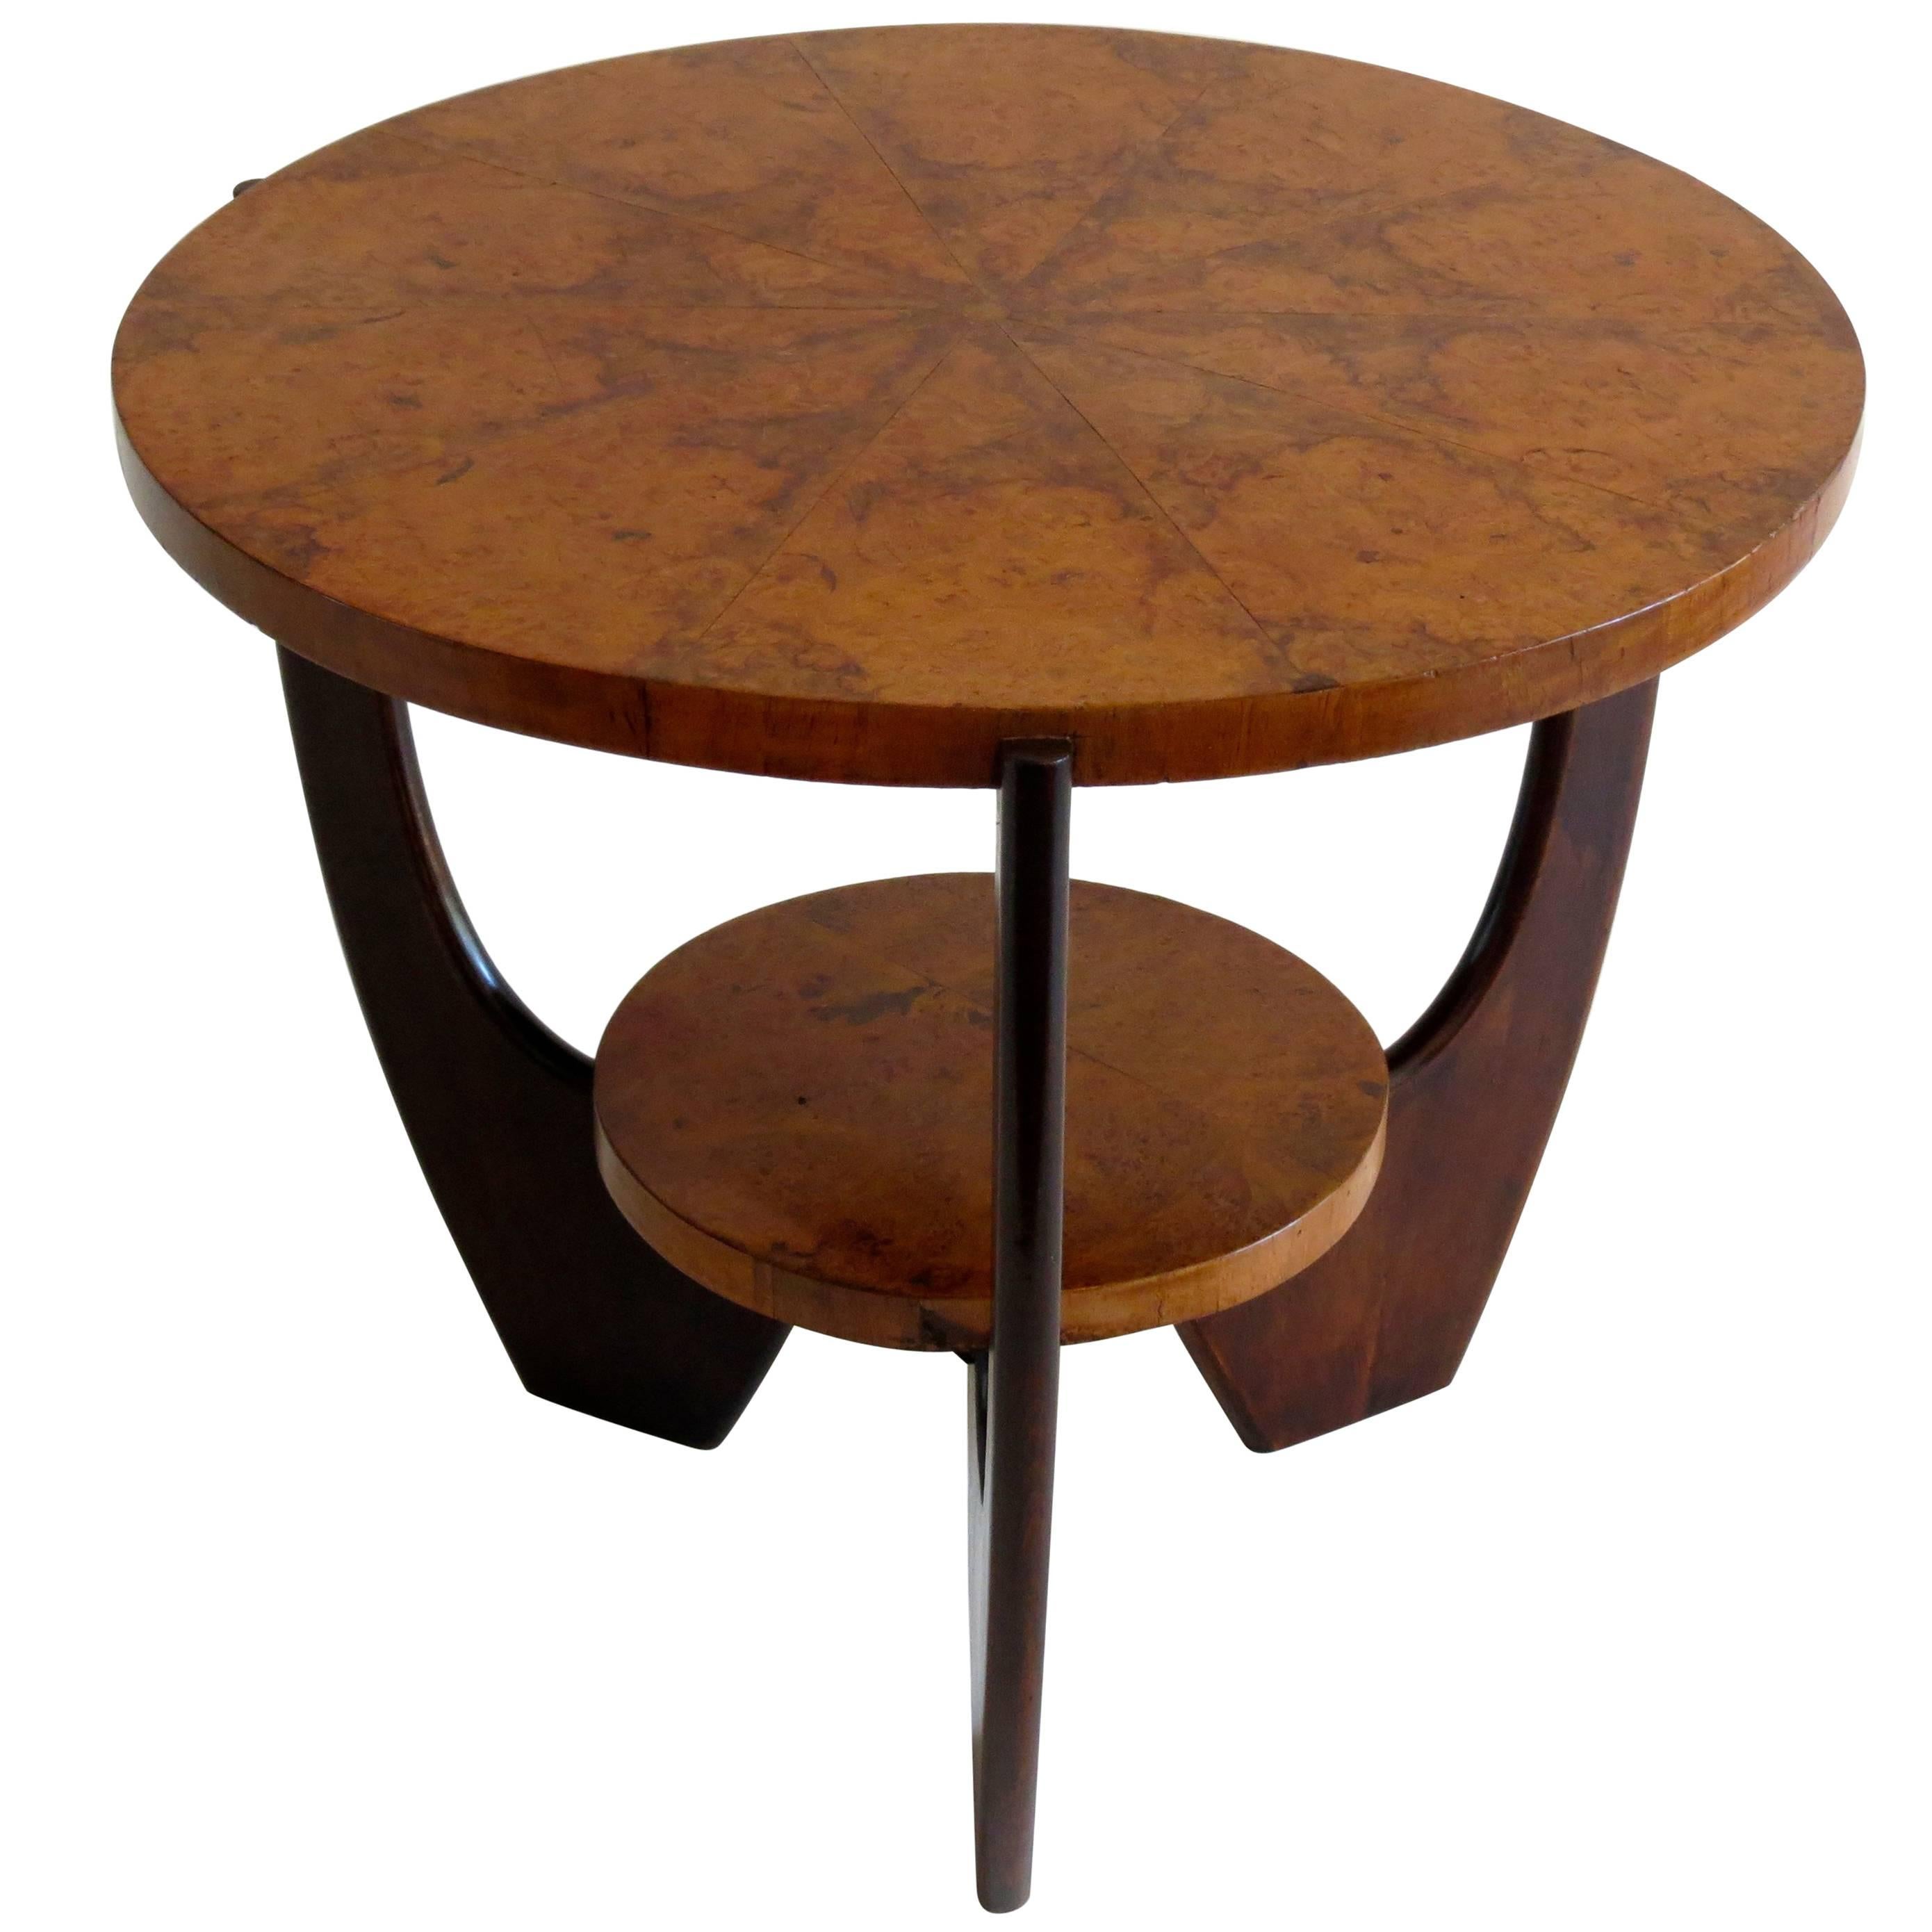 Round Deco Briar Root Side Table, 1930